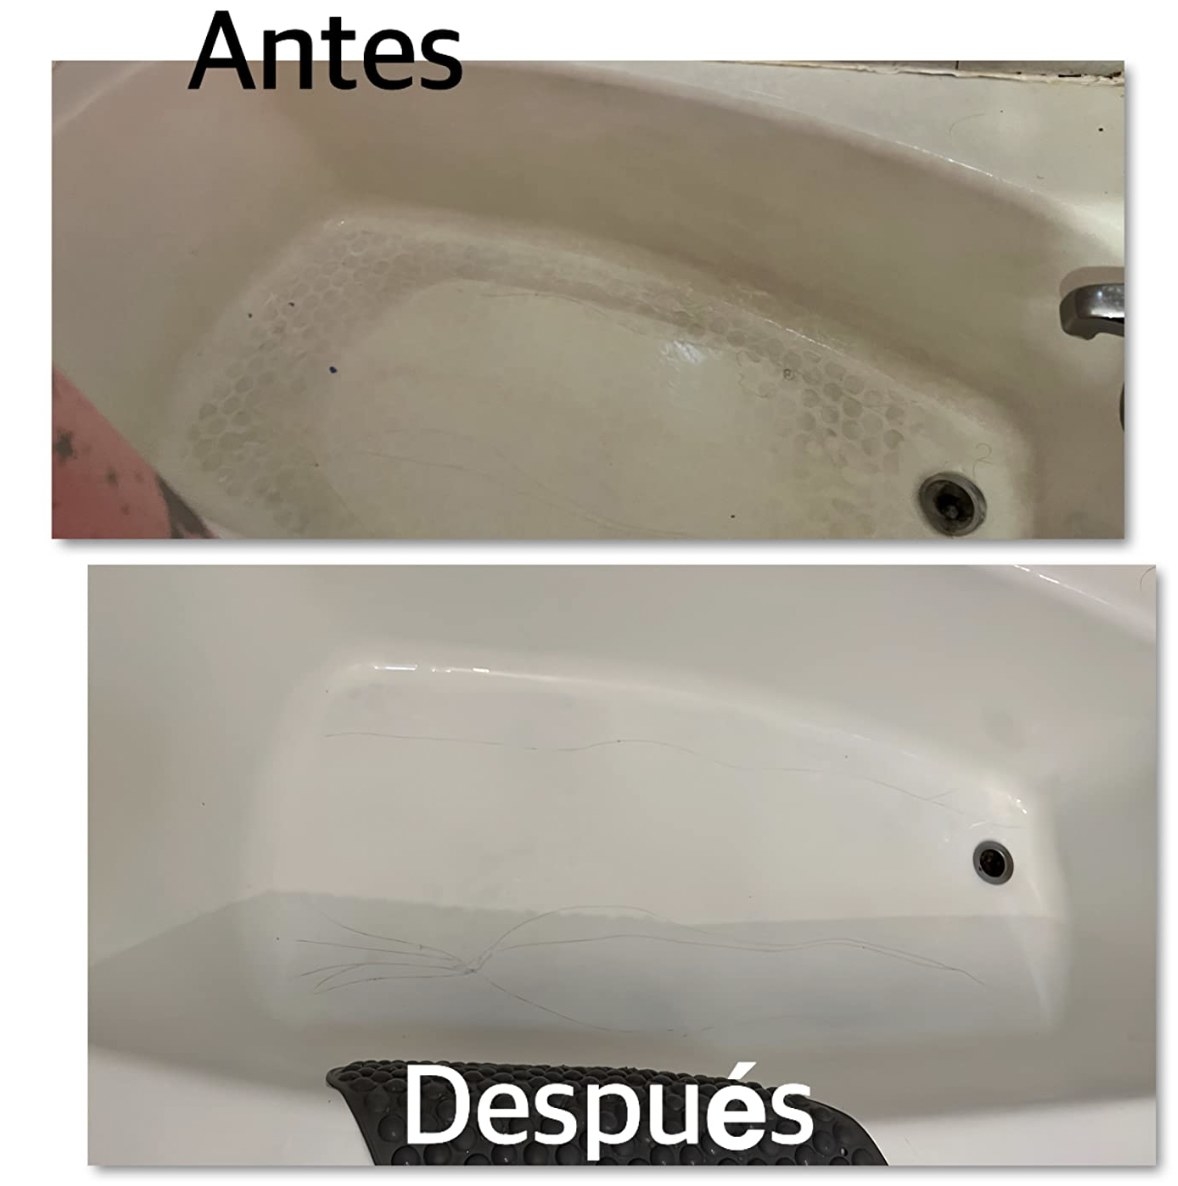 A before and after of a tub after using the product